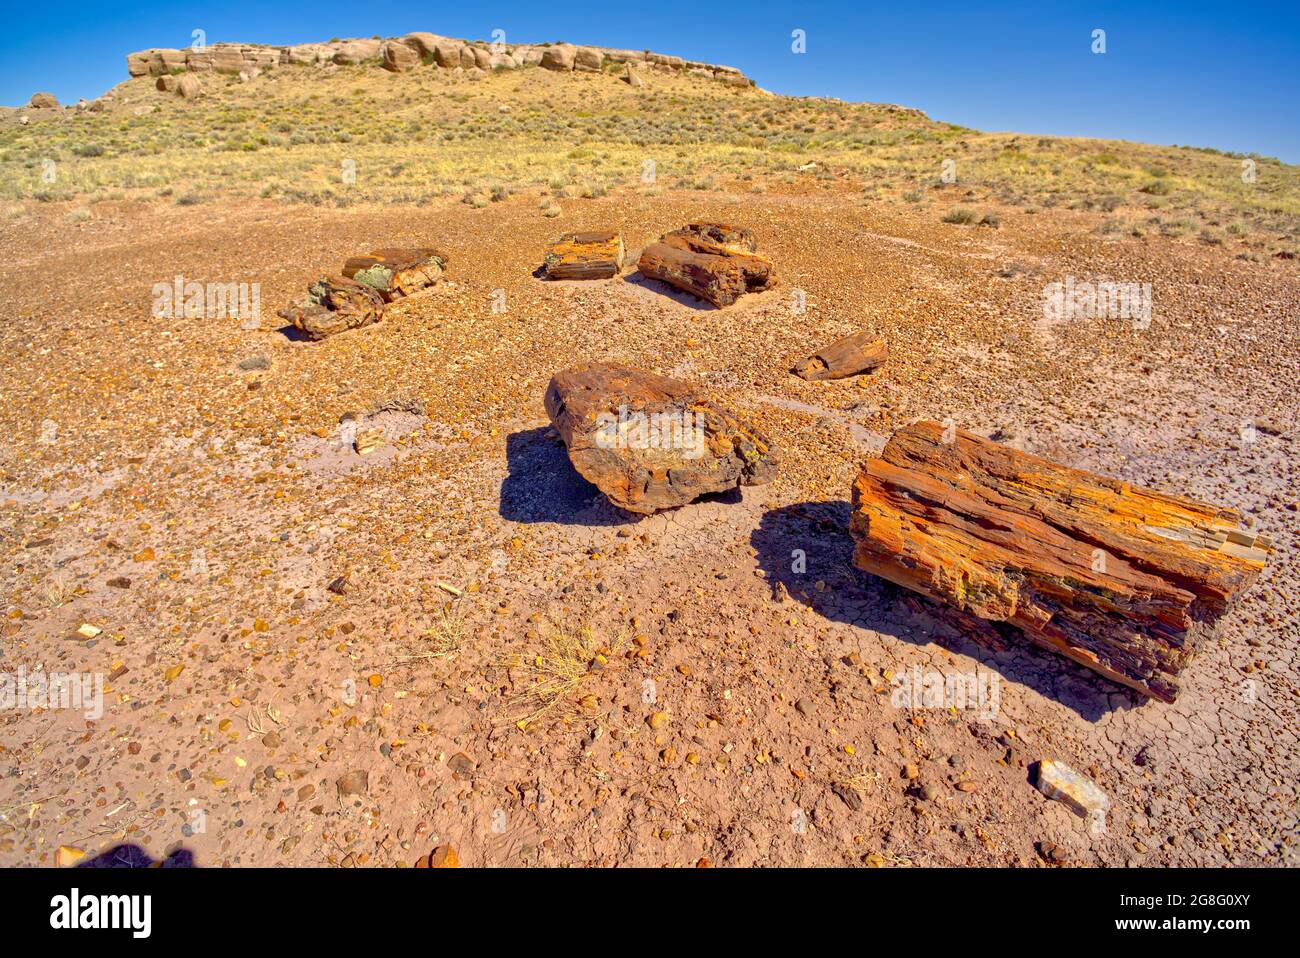 Formation called Agate Mesa, viewed from a group of petrified wood in the foreground, Petrified Forest National Park, Arizona, USA Stock Photo